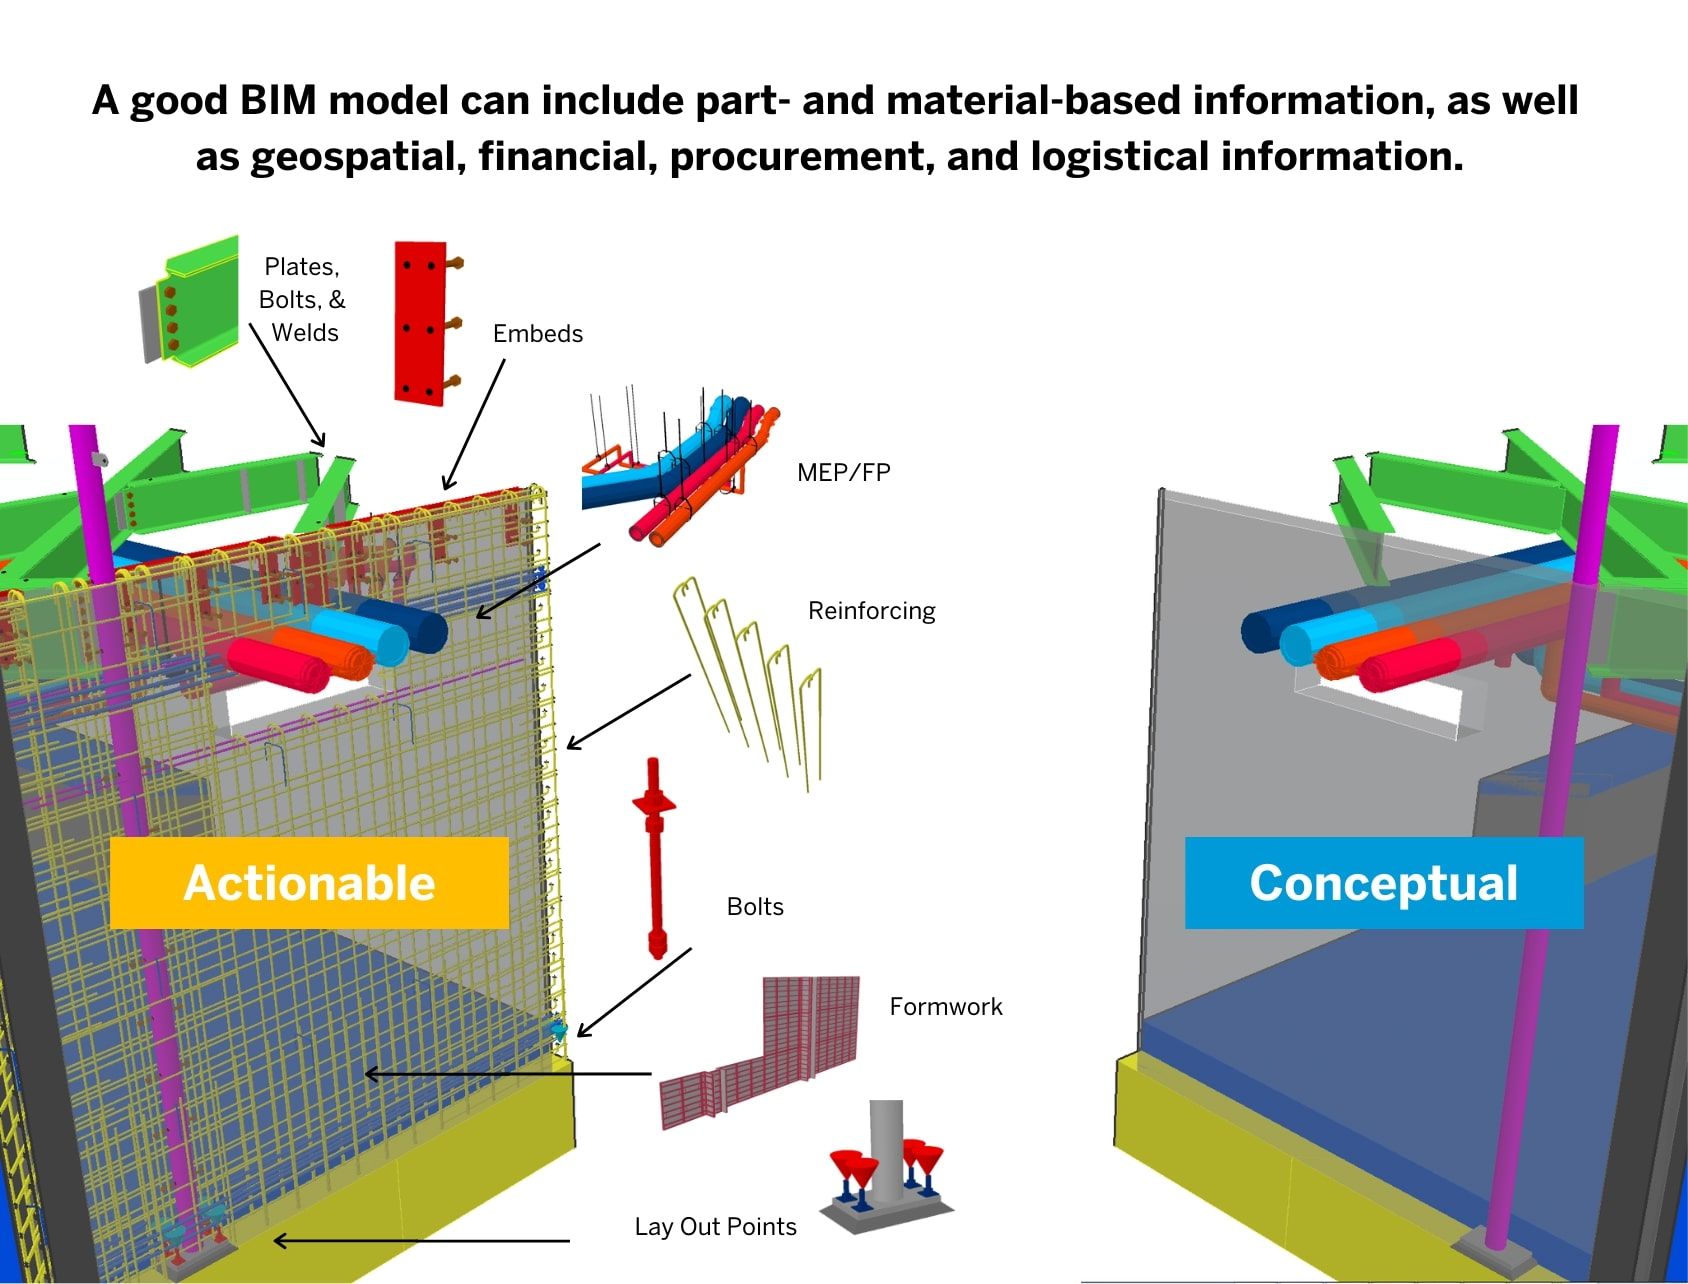 The difference between conceptual and actionable BIM model with building parts information